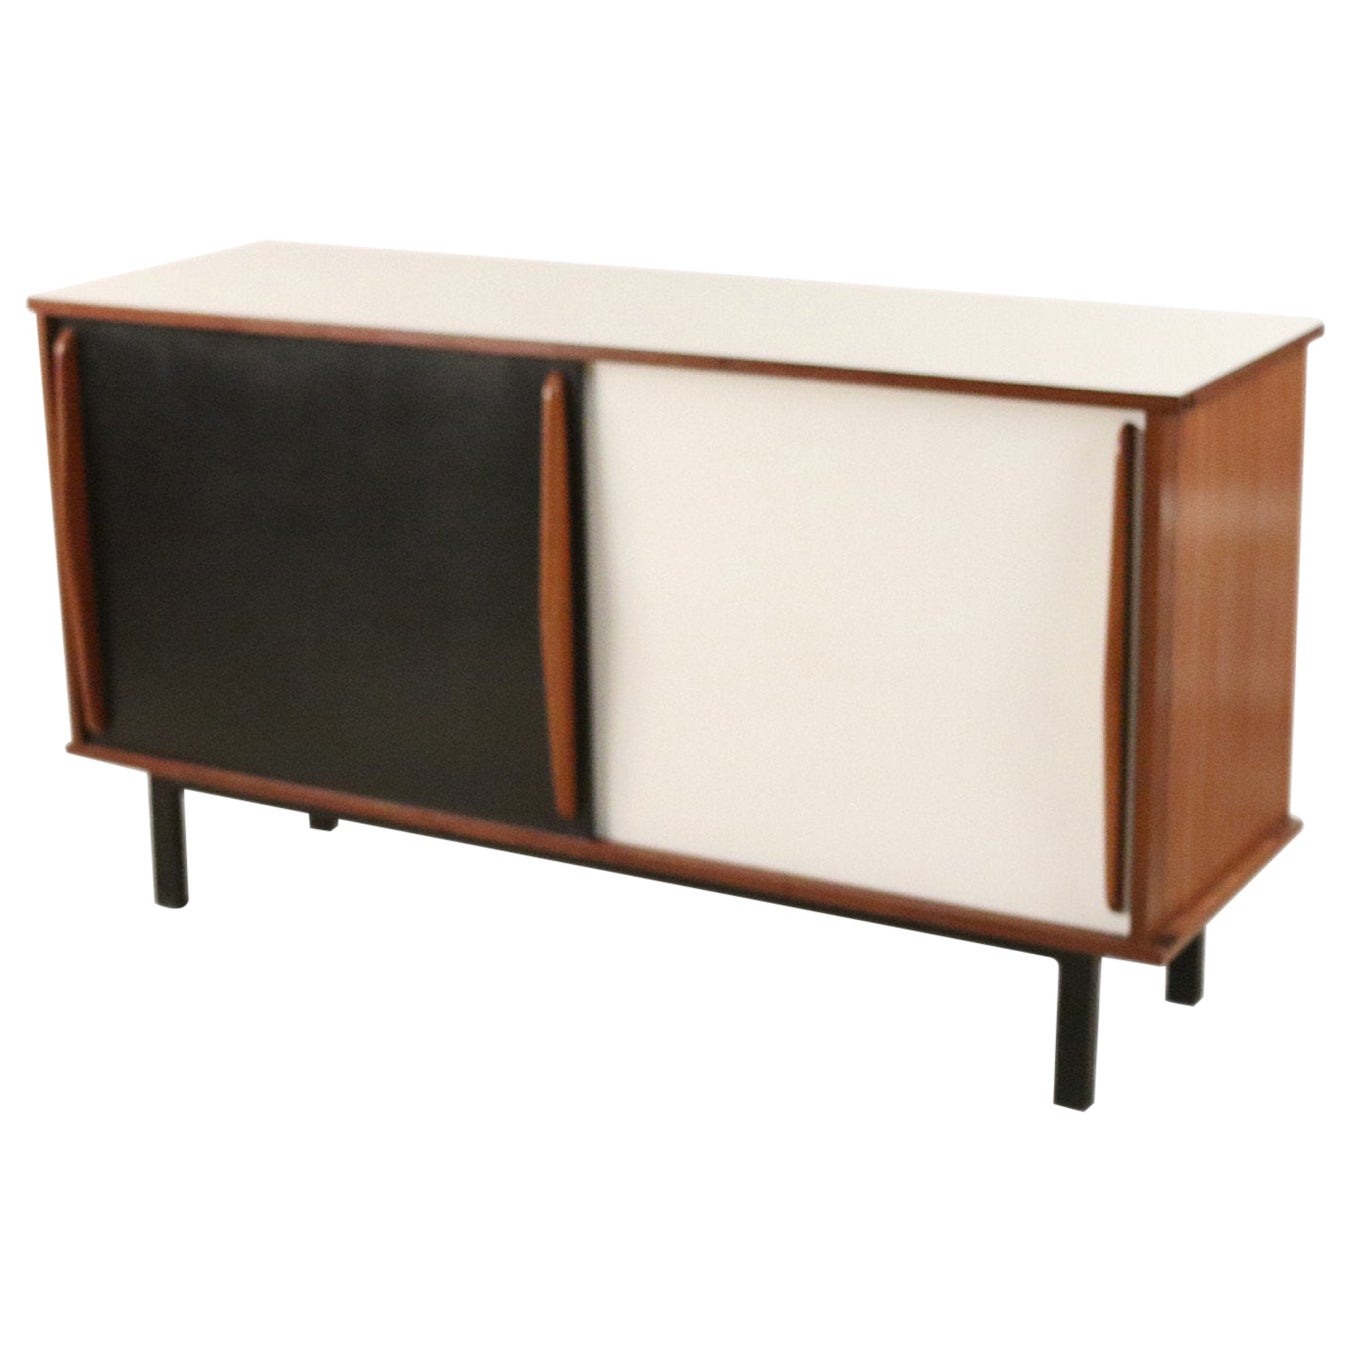 Charlotte Perriand French 1950s Mahogany and Black and White Veneer Sideboard